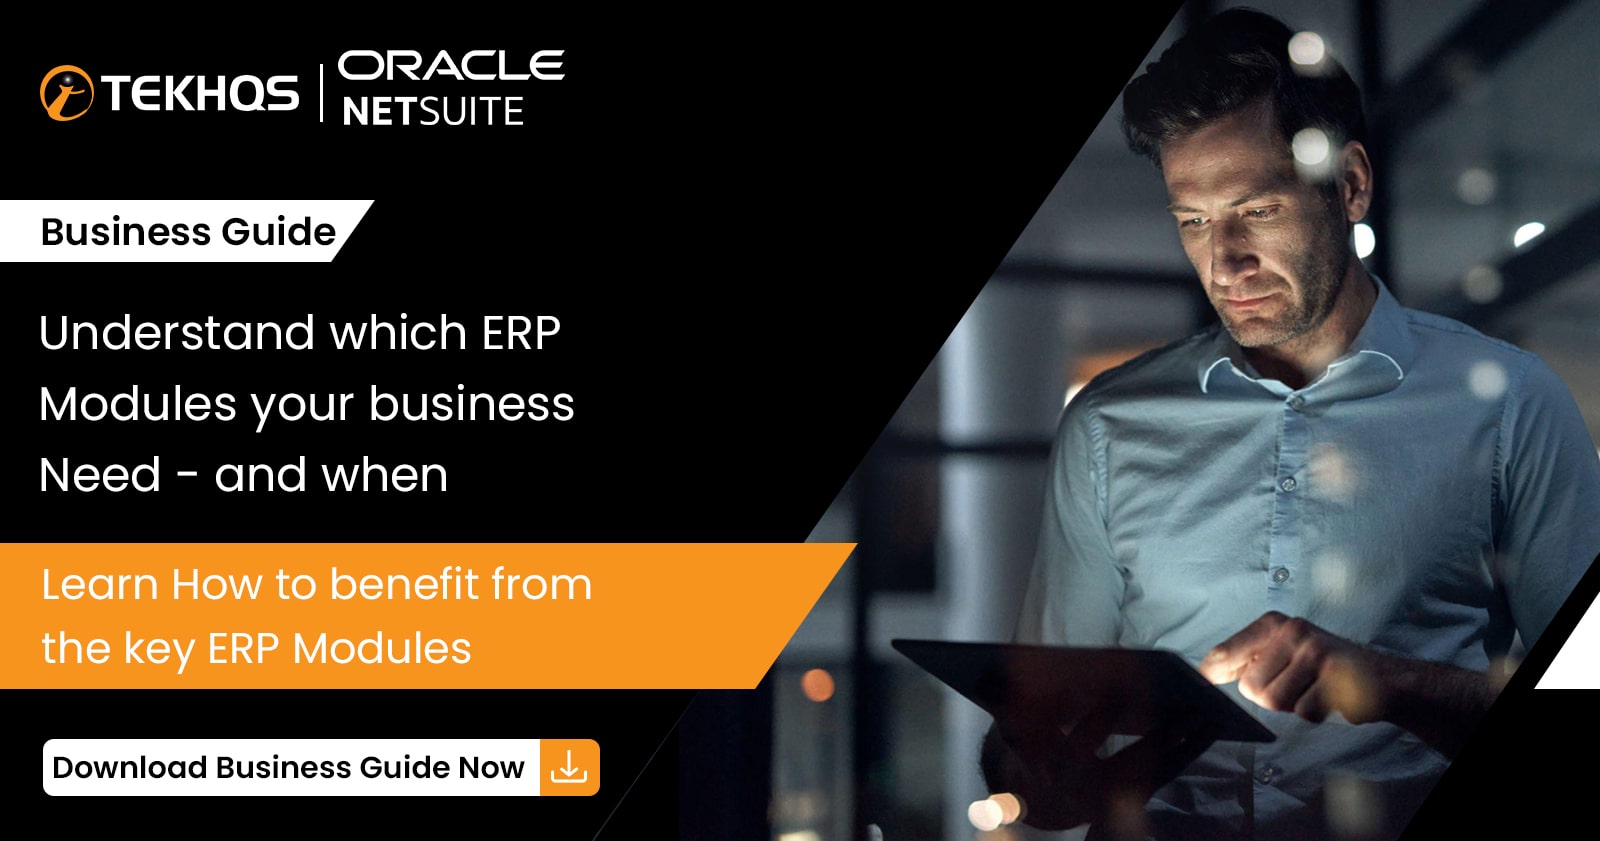 Understand Which ERP Modules Your Business Needs